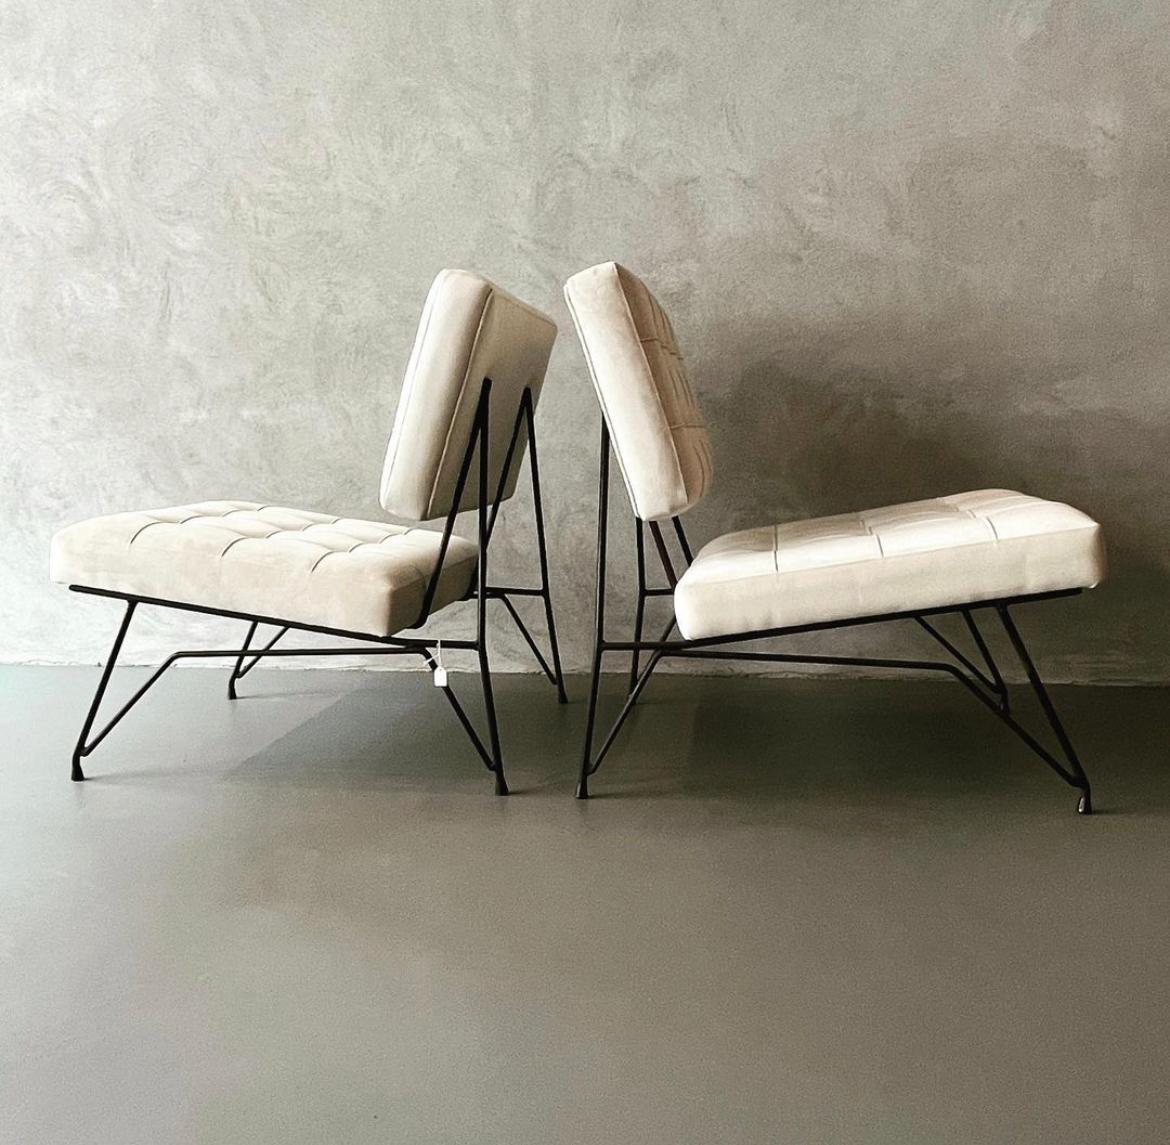 Cerutti pair armchairs manufactured in Lissone, Italy, 1960.
Black lacquered metal structure, white velvet upholstered.
Excellent vintage patina.
  